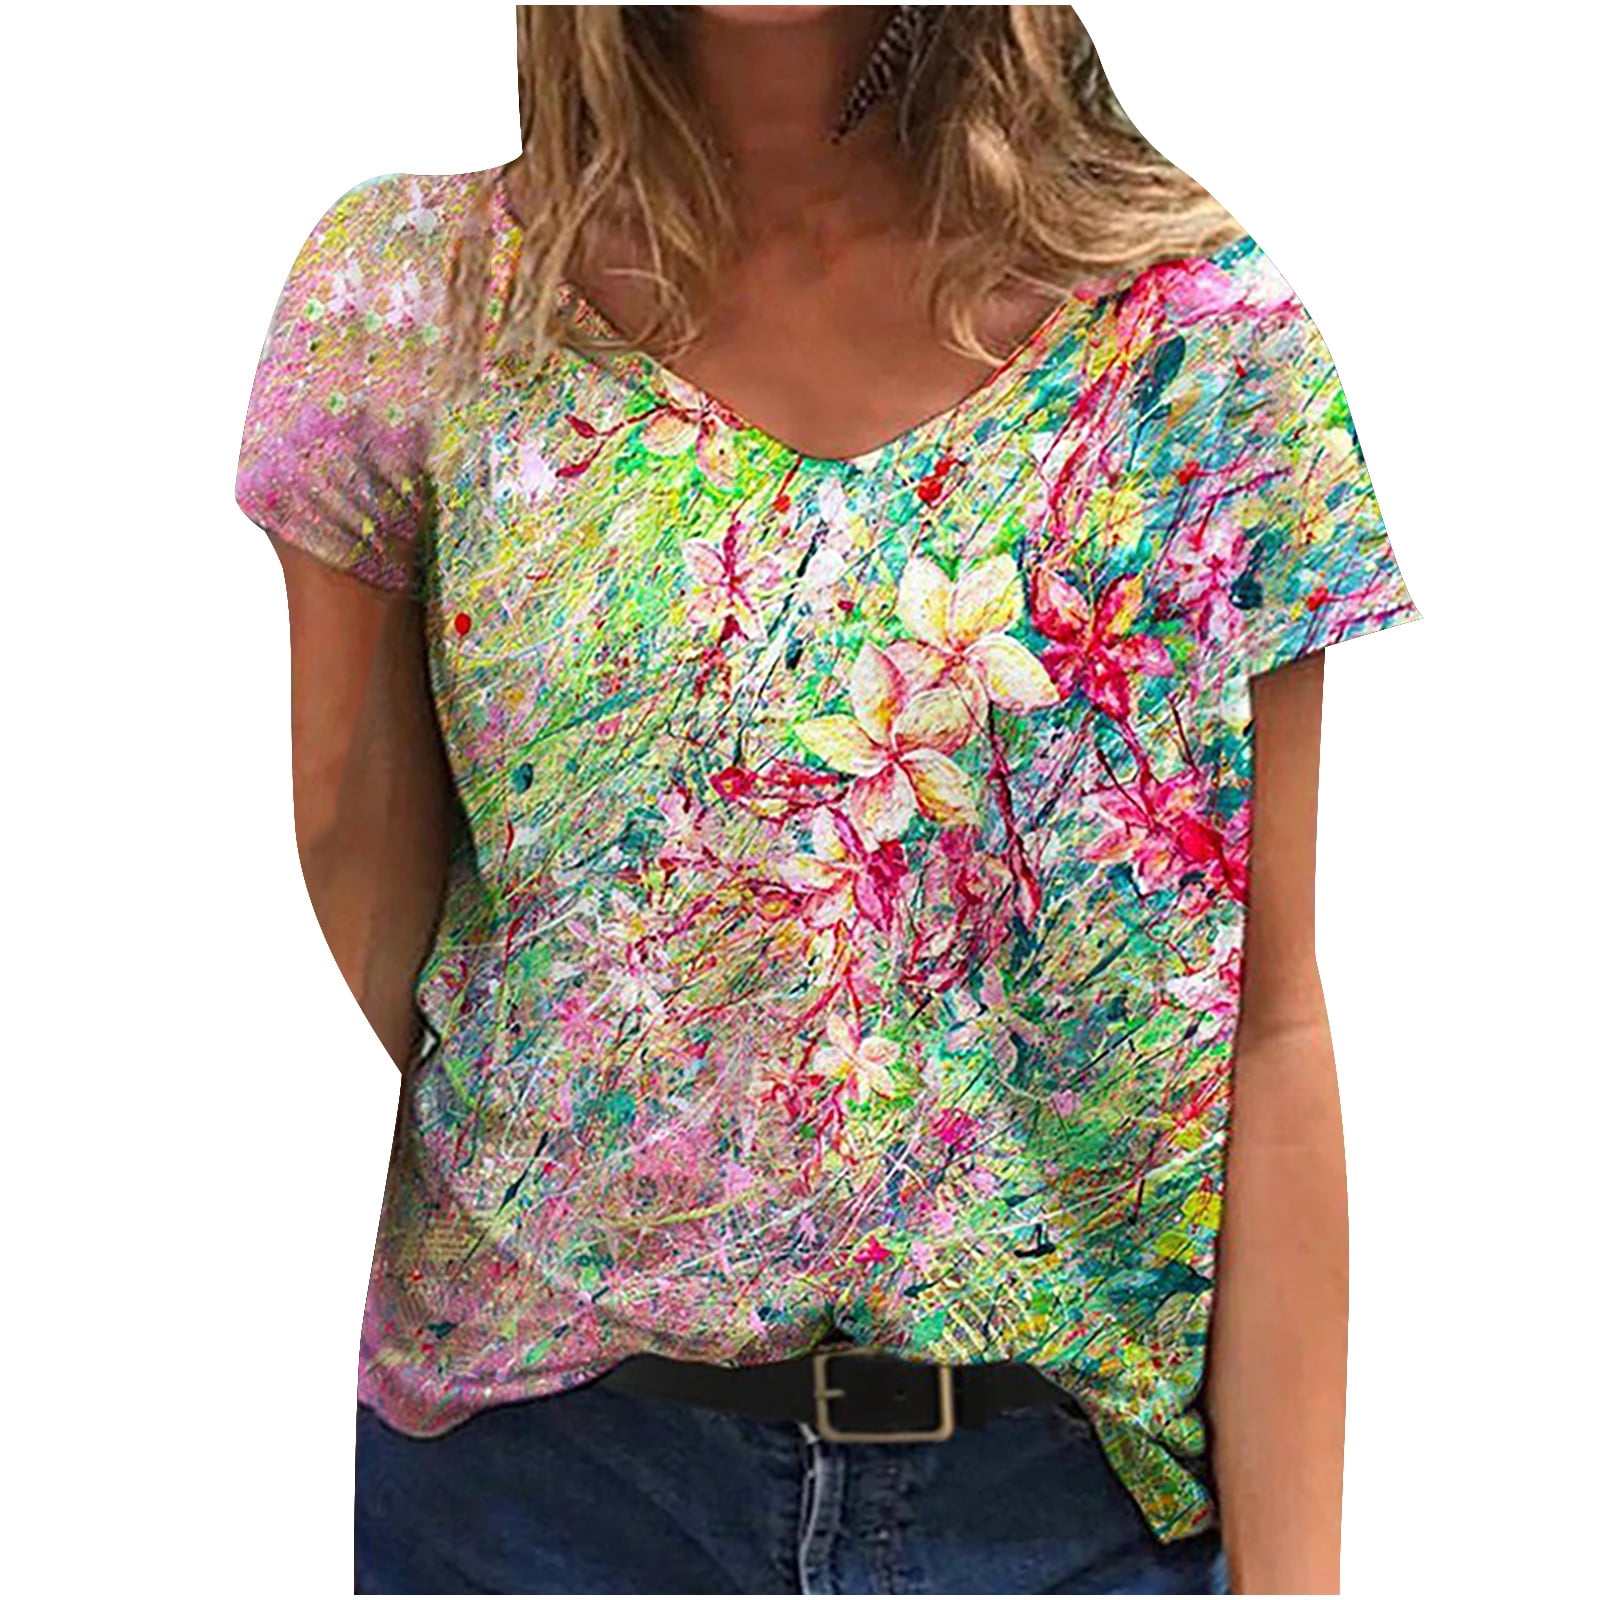 Womens Short Sleeve Shirts Cute Printed V-Neck Tshirts Blouse Summer Casual Tops Loose Fit Graphic Tees 